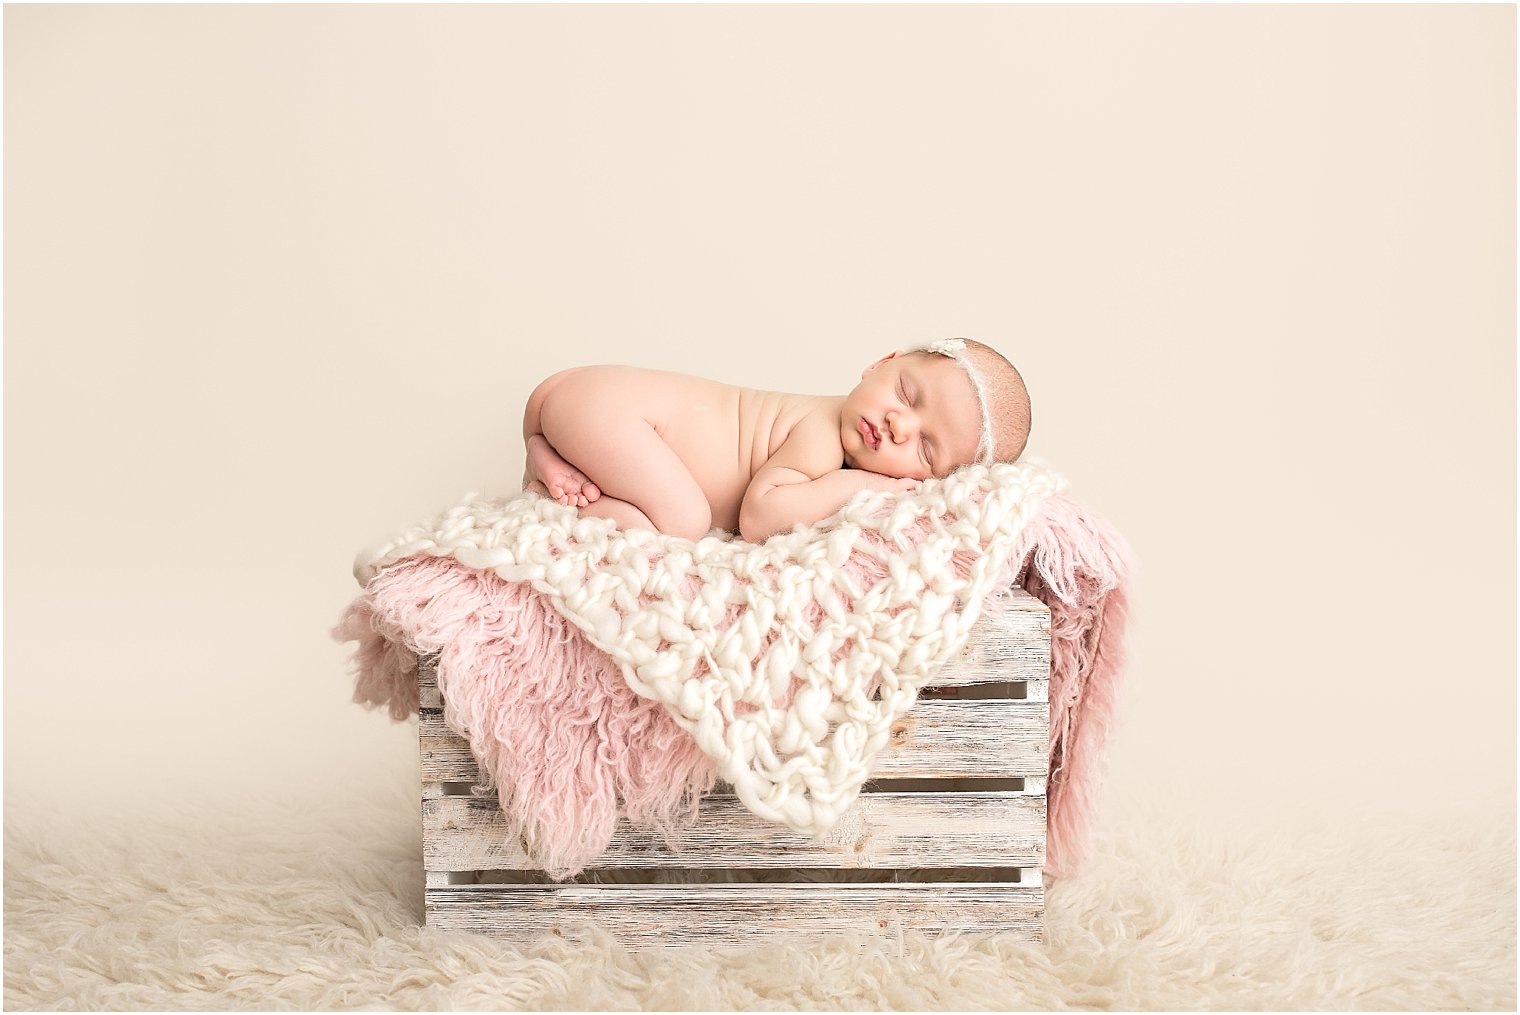 Baby girl on wooden crate